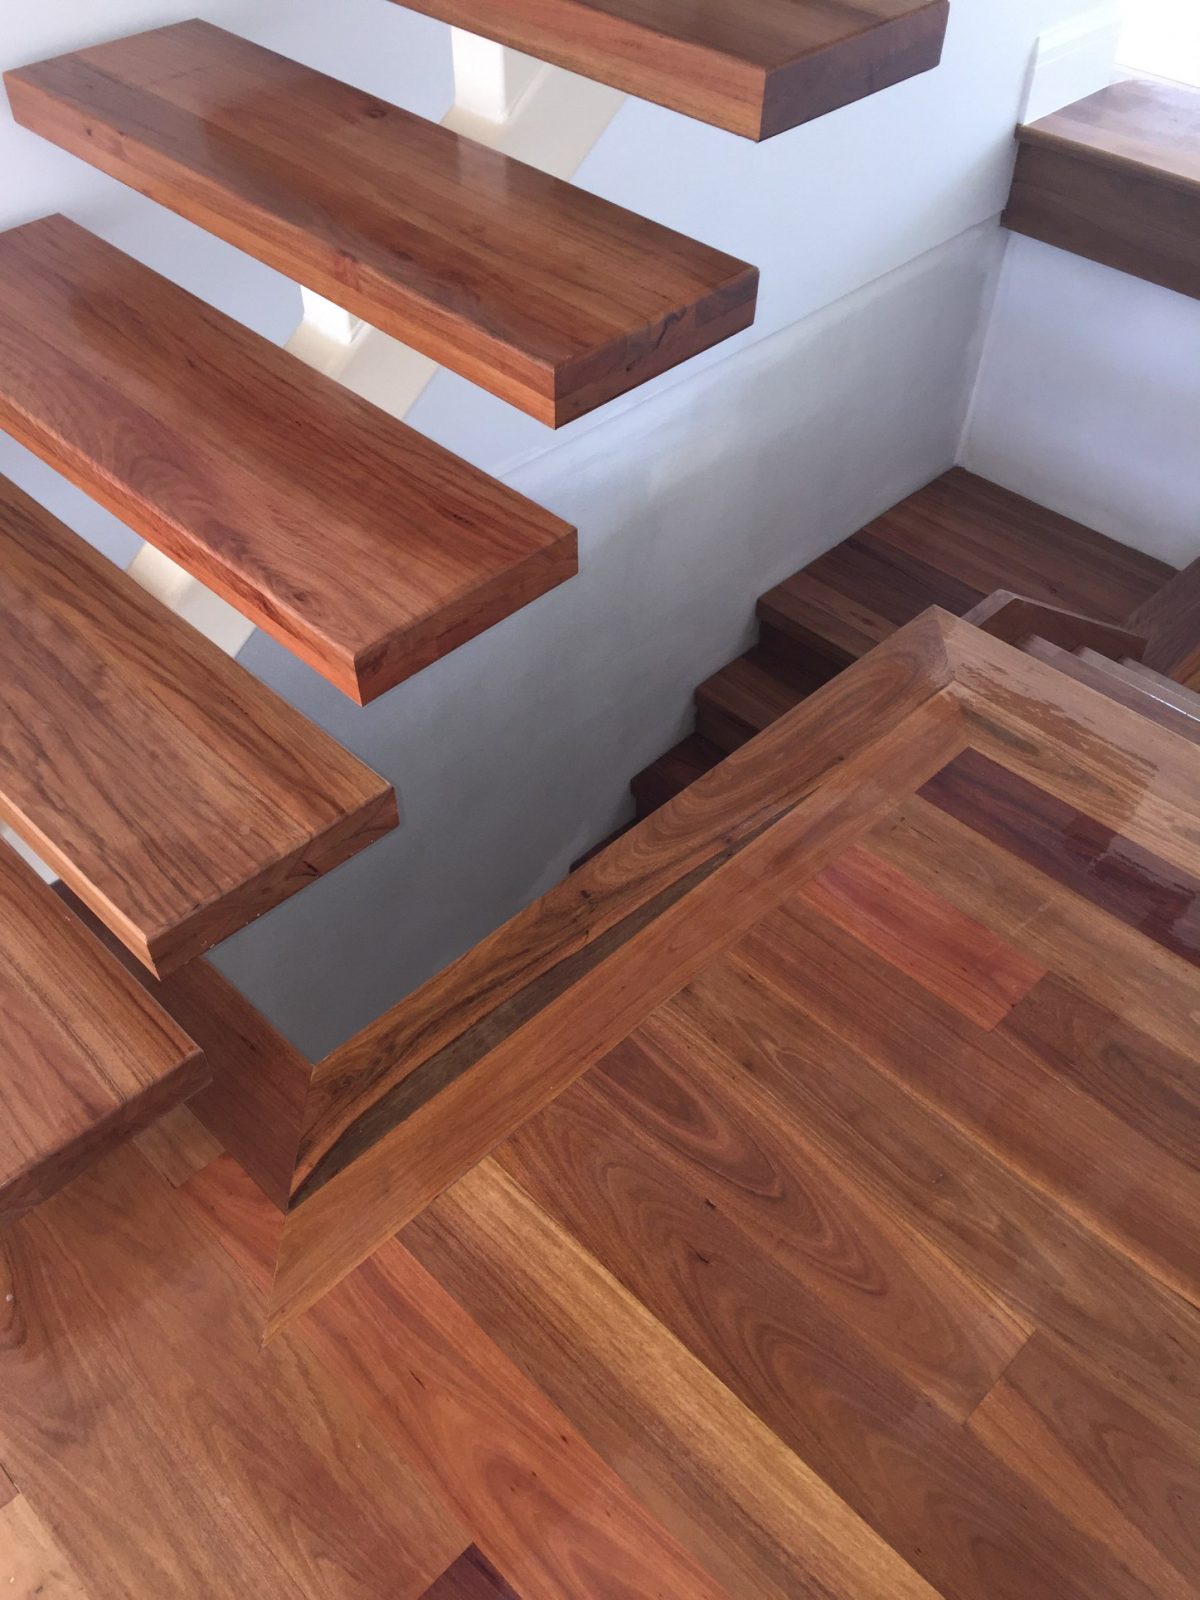 Spotted Gum timber flooring and solid staircase treads with steel spine by Timber Floors Pty Ltd